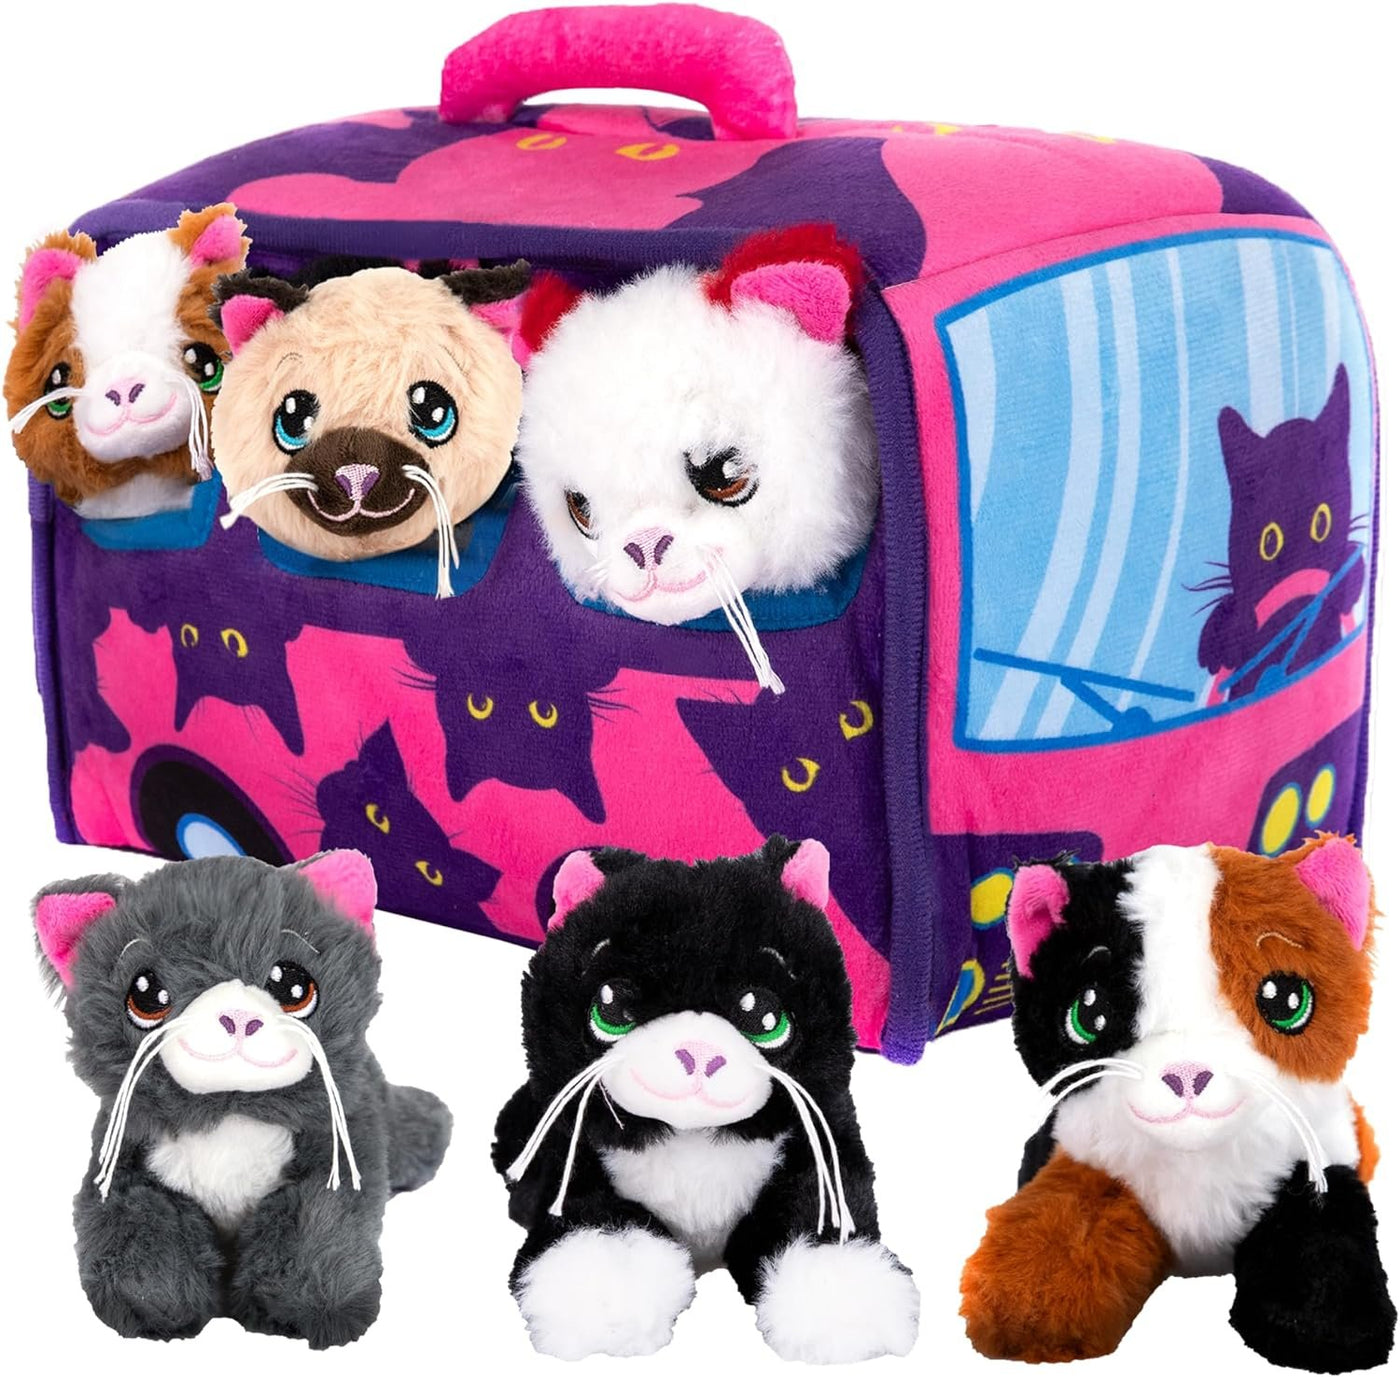 Kitten Stuffed Animals, 6 Stuffed Cat Plush with Carrier Bus House Playset, Kitty Toys Birthday Gifts for Girls and Boys, Stuffed Animals in Bulk for Classroom Party, Travel Road Trip